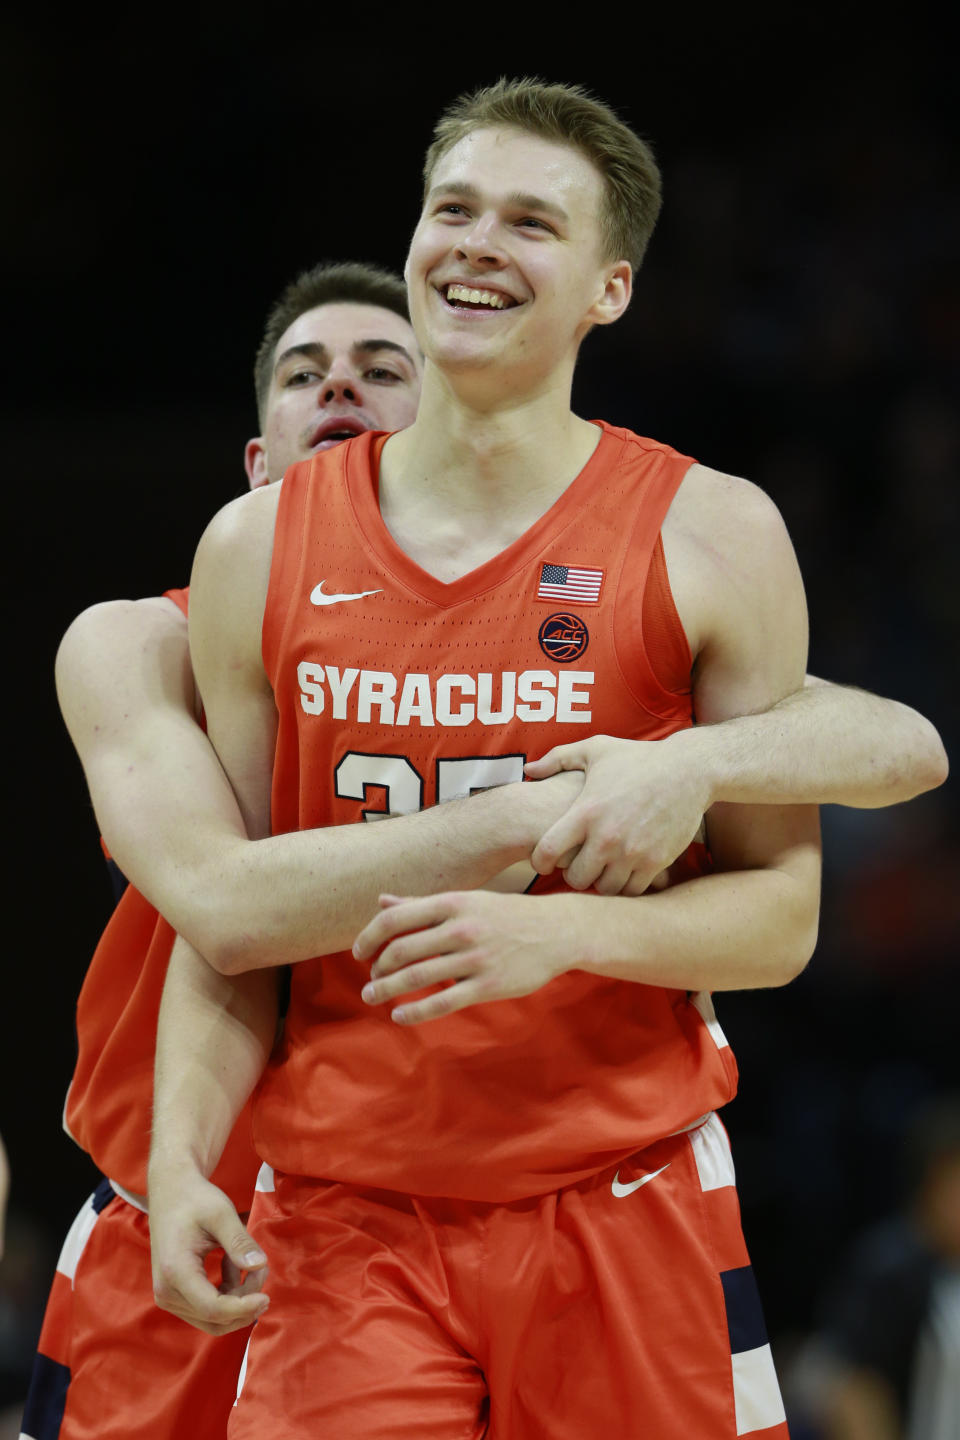 Syracuse guard Buddy Boeheim (35) celebrates a three point basket along with teammate Syracuse guard Joseph Girard III, left, during the second half of an NCAA college basketball game in Charlottesville, Va., Saturday, Jan. 11, 2020. Syracuse defeated Virginia 63-55. (AP Photo/Steve Helber)